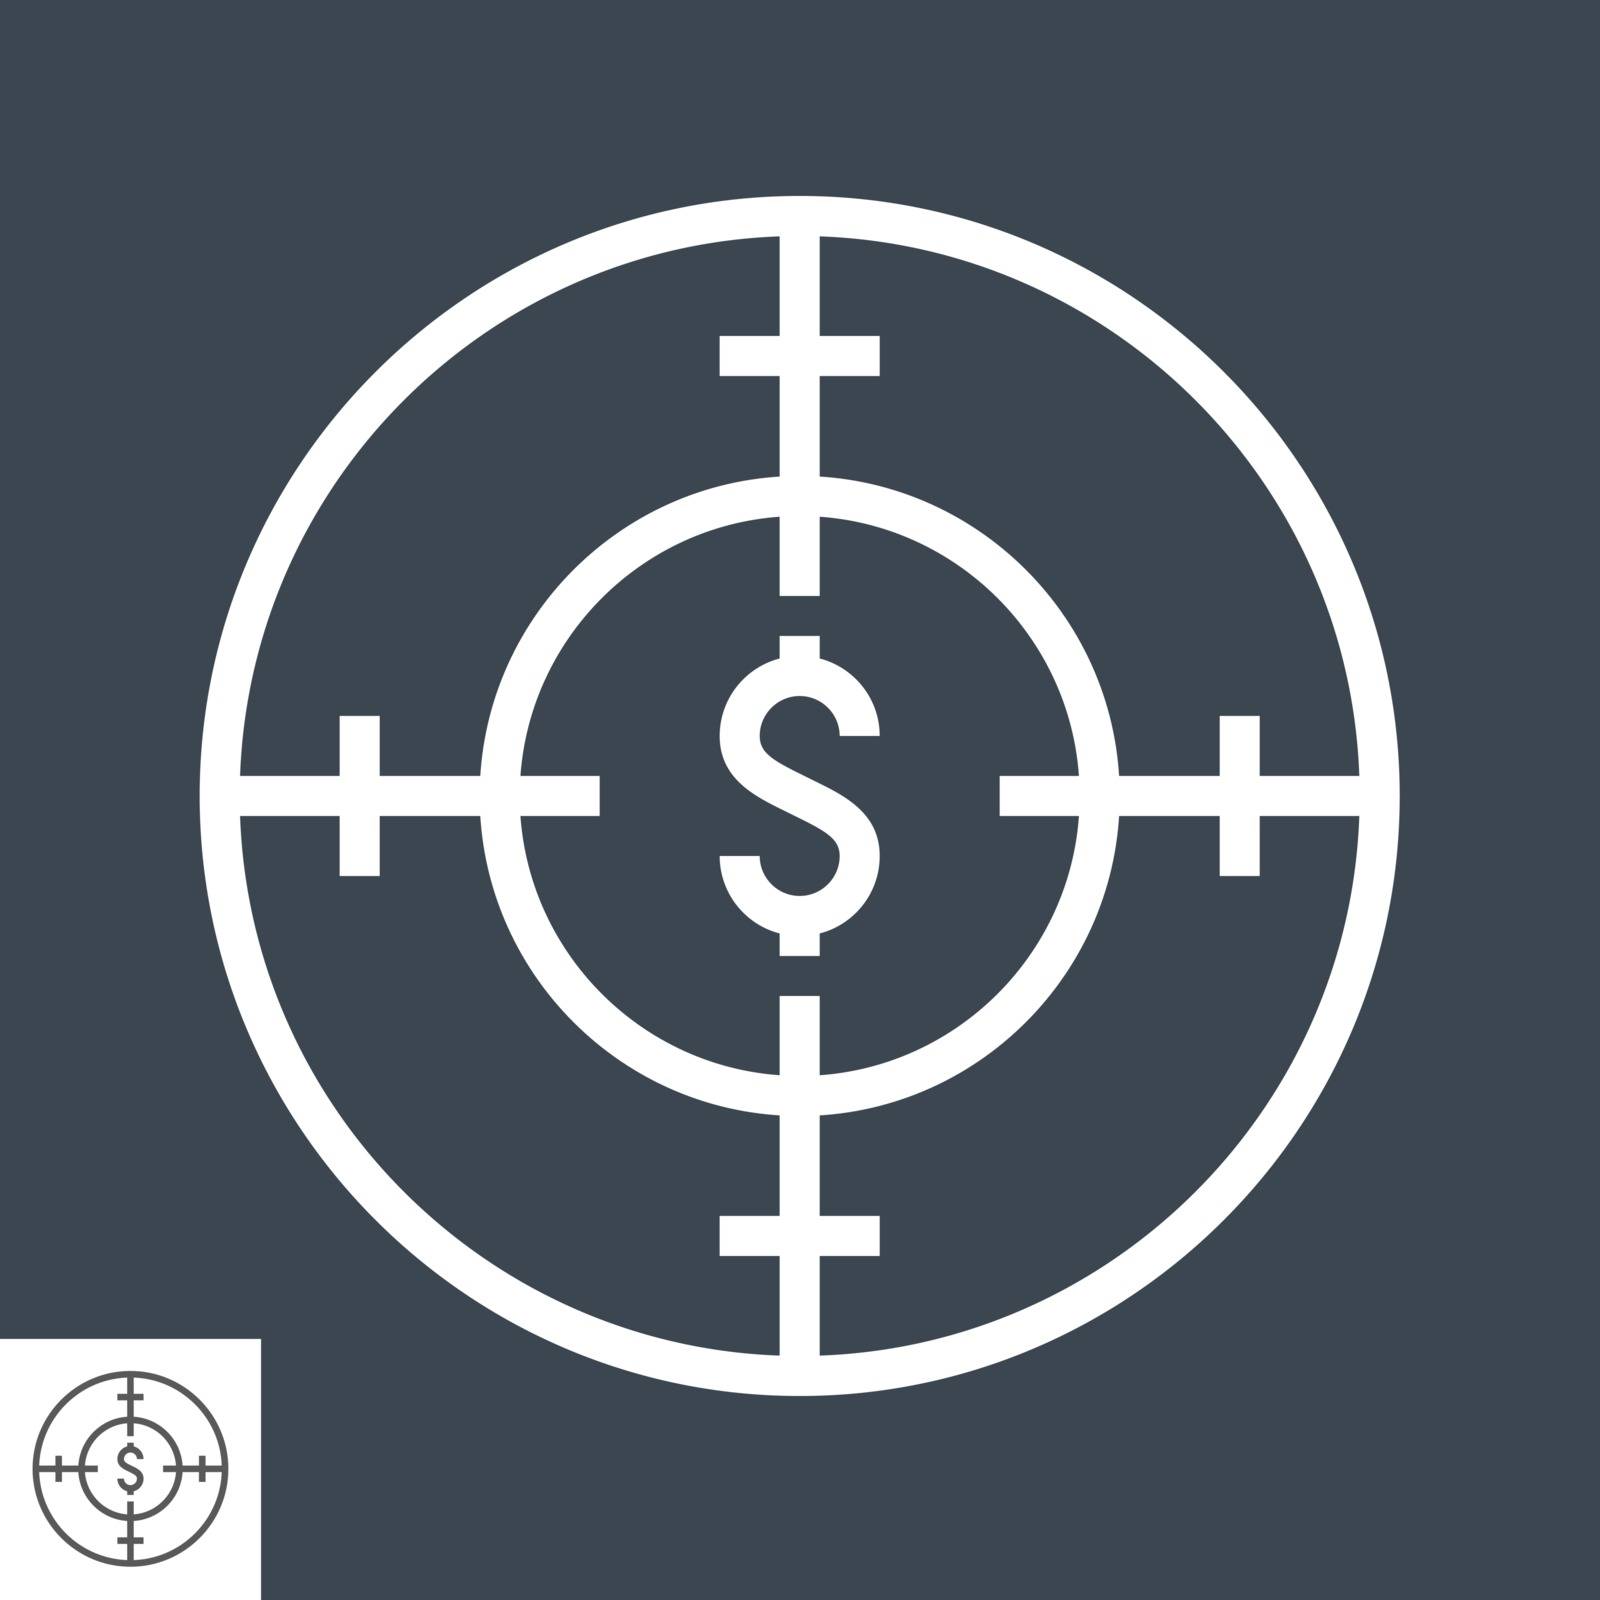 Funds Hunting Thin Line Vector Icon. Flat icon isolated on the black background. Editable EPS file. Vector illustration.